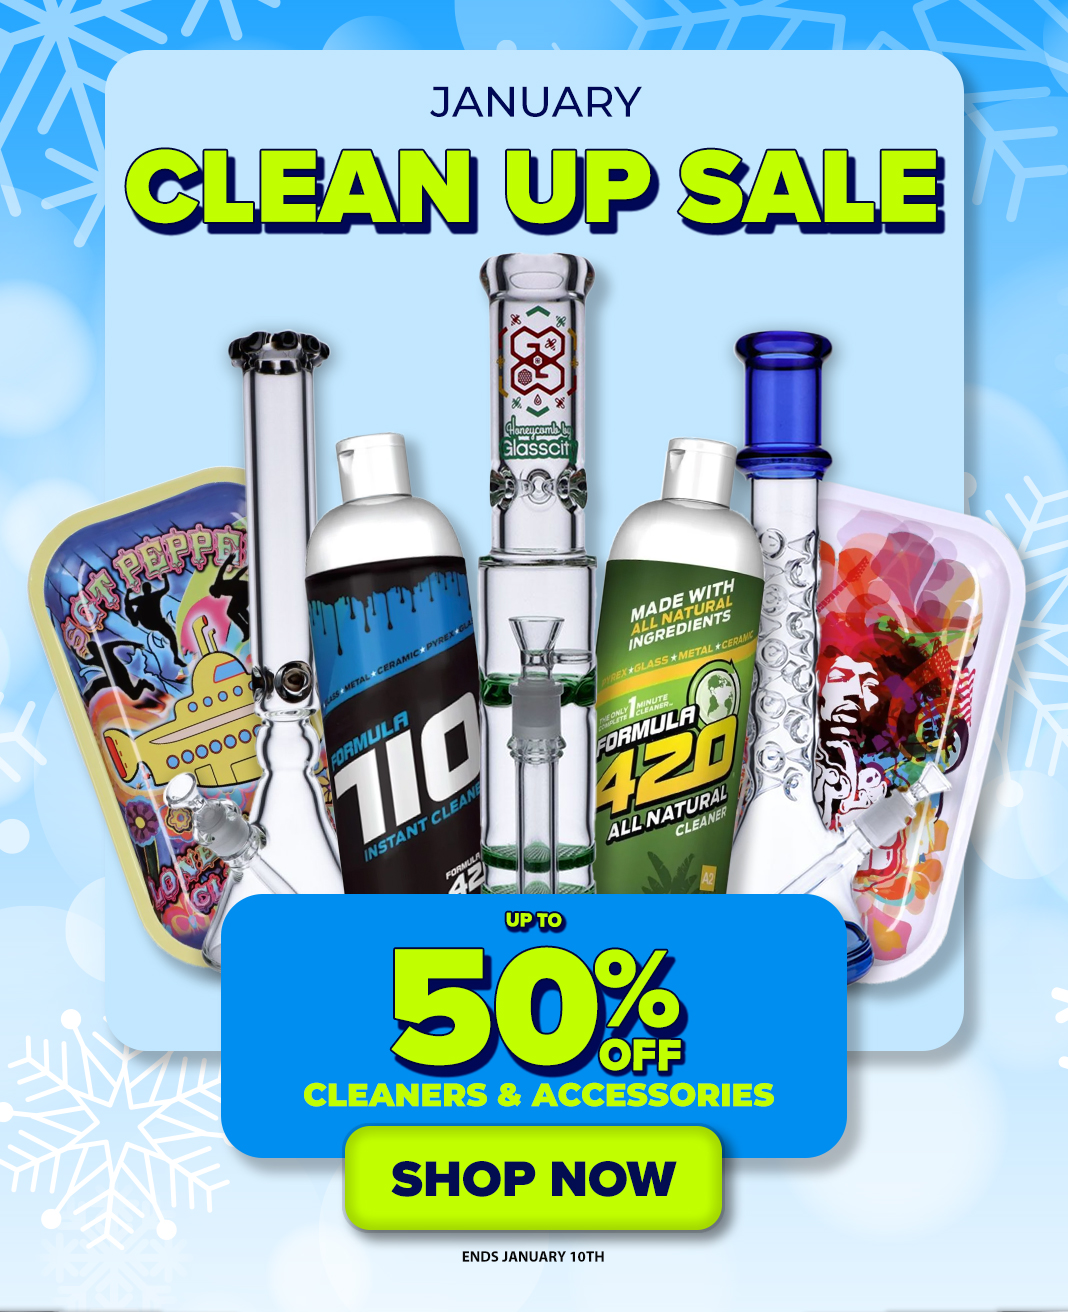 January Clean Up - Up to 50% off